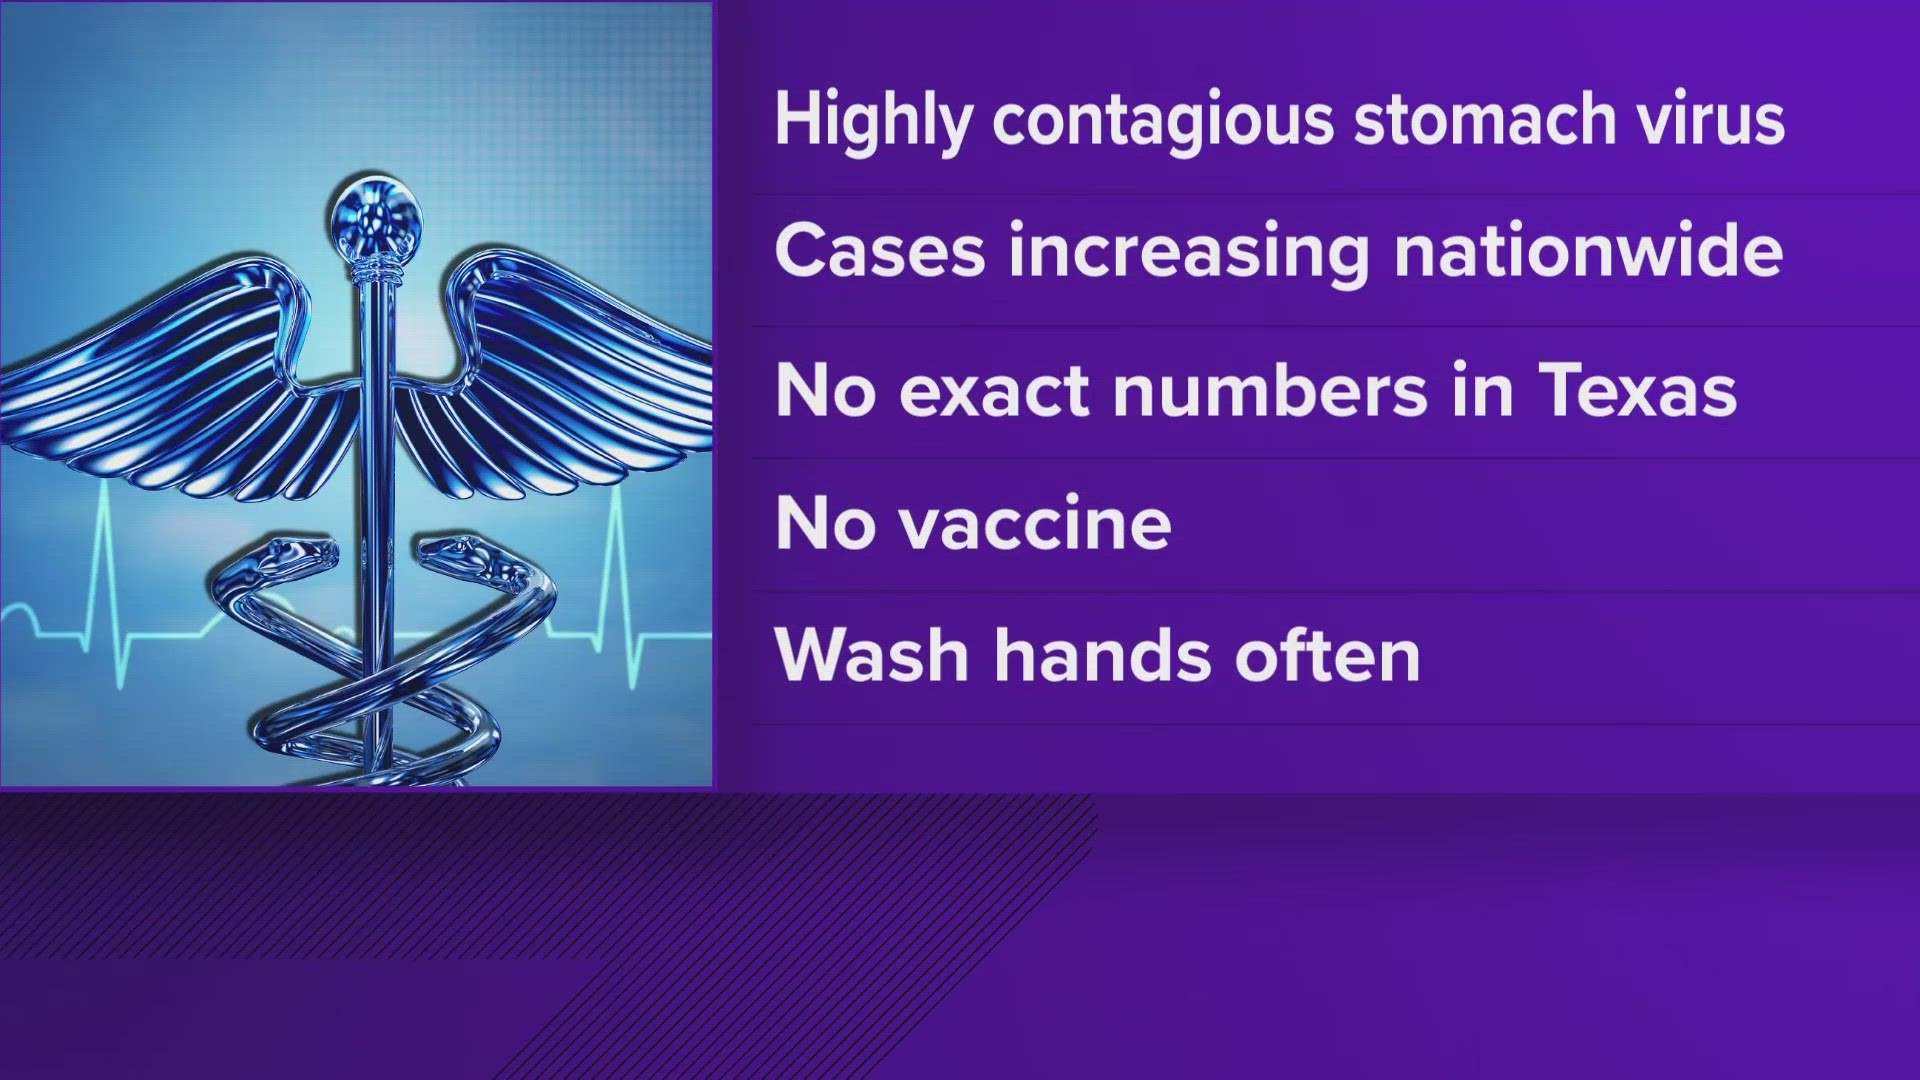 Norovirus is a highly contagious stomach virus. The number of cases has more than doubled in the last three months.